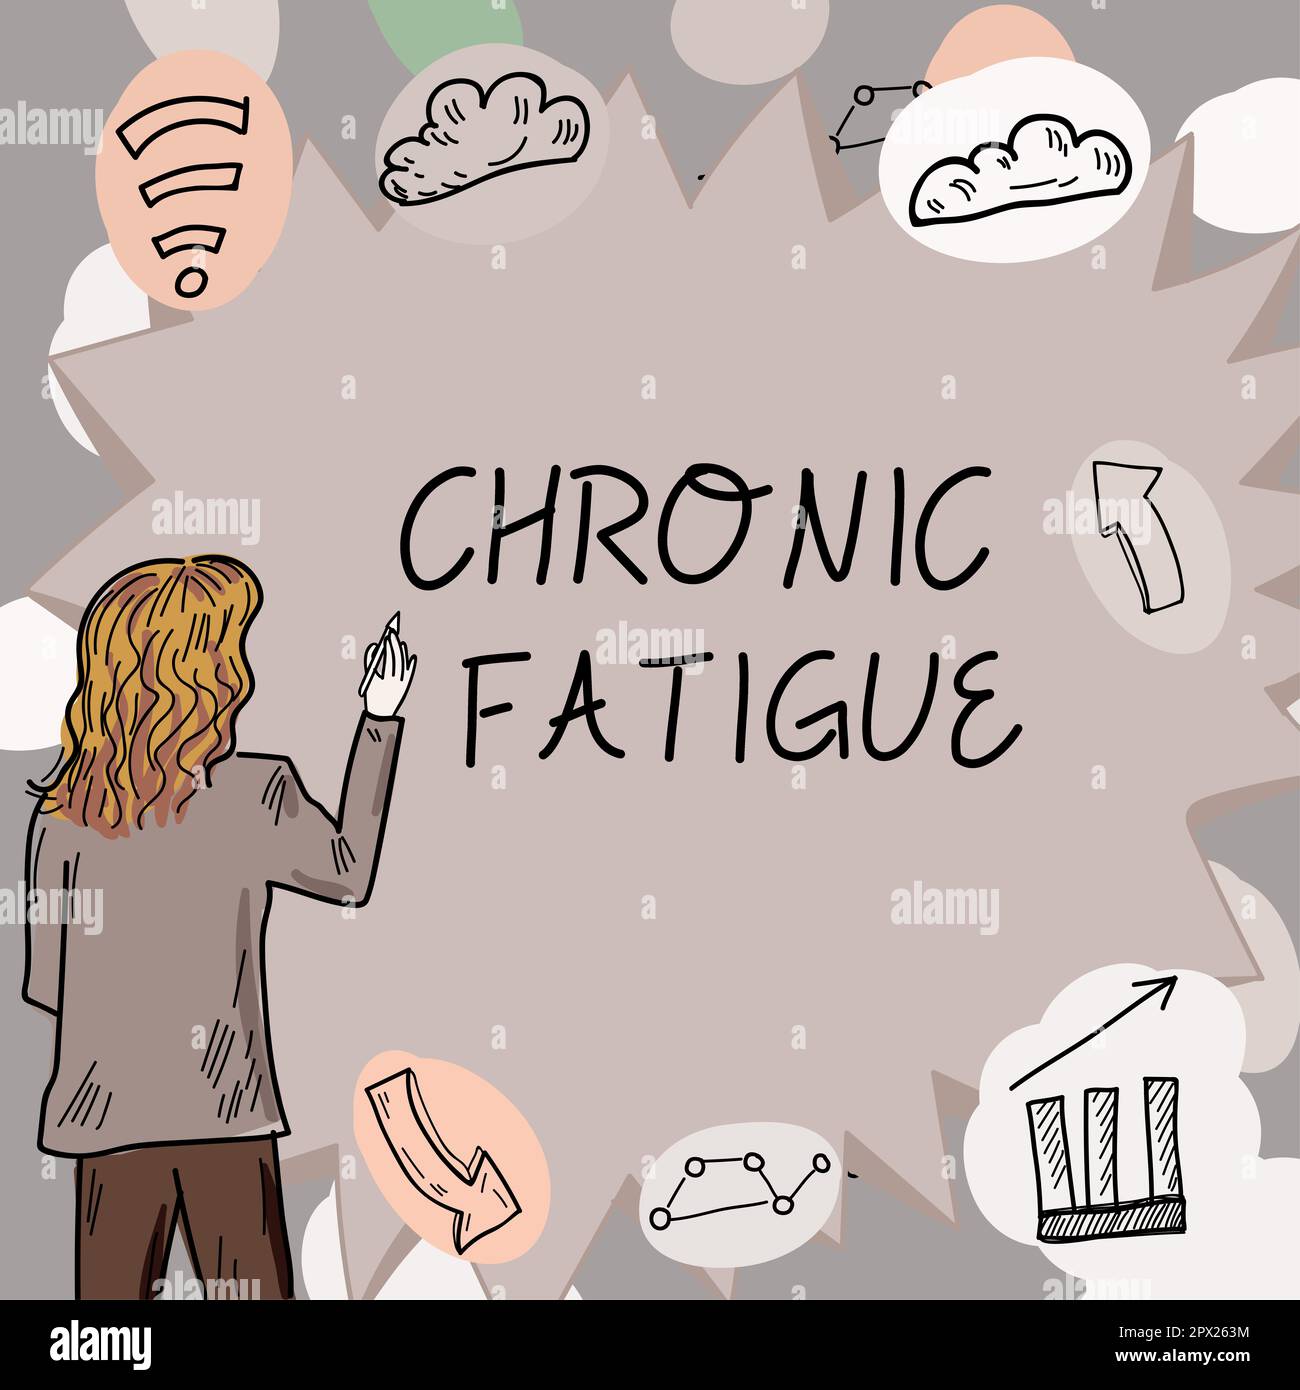 Hand writing sign Chronic Fatigue, Word Written on A disease or condition that lasts for longer time Stock Photo